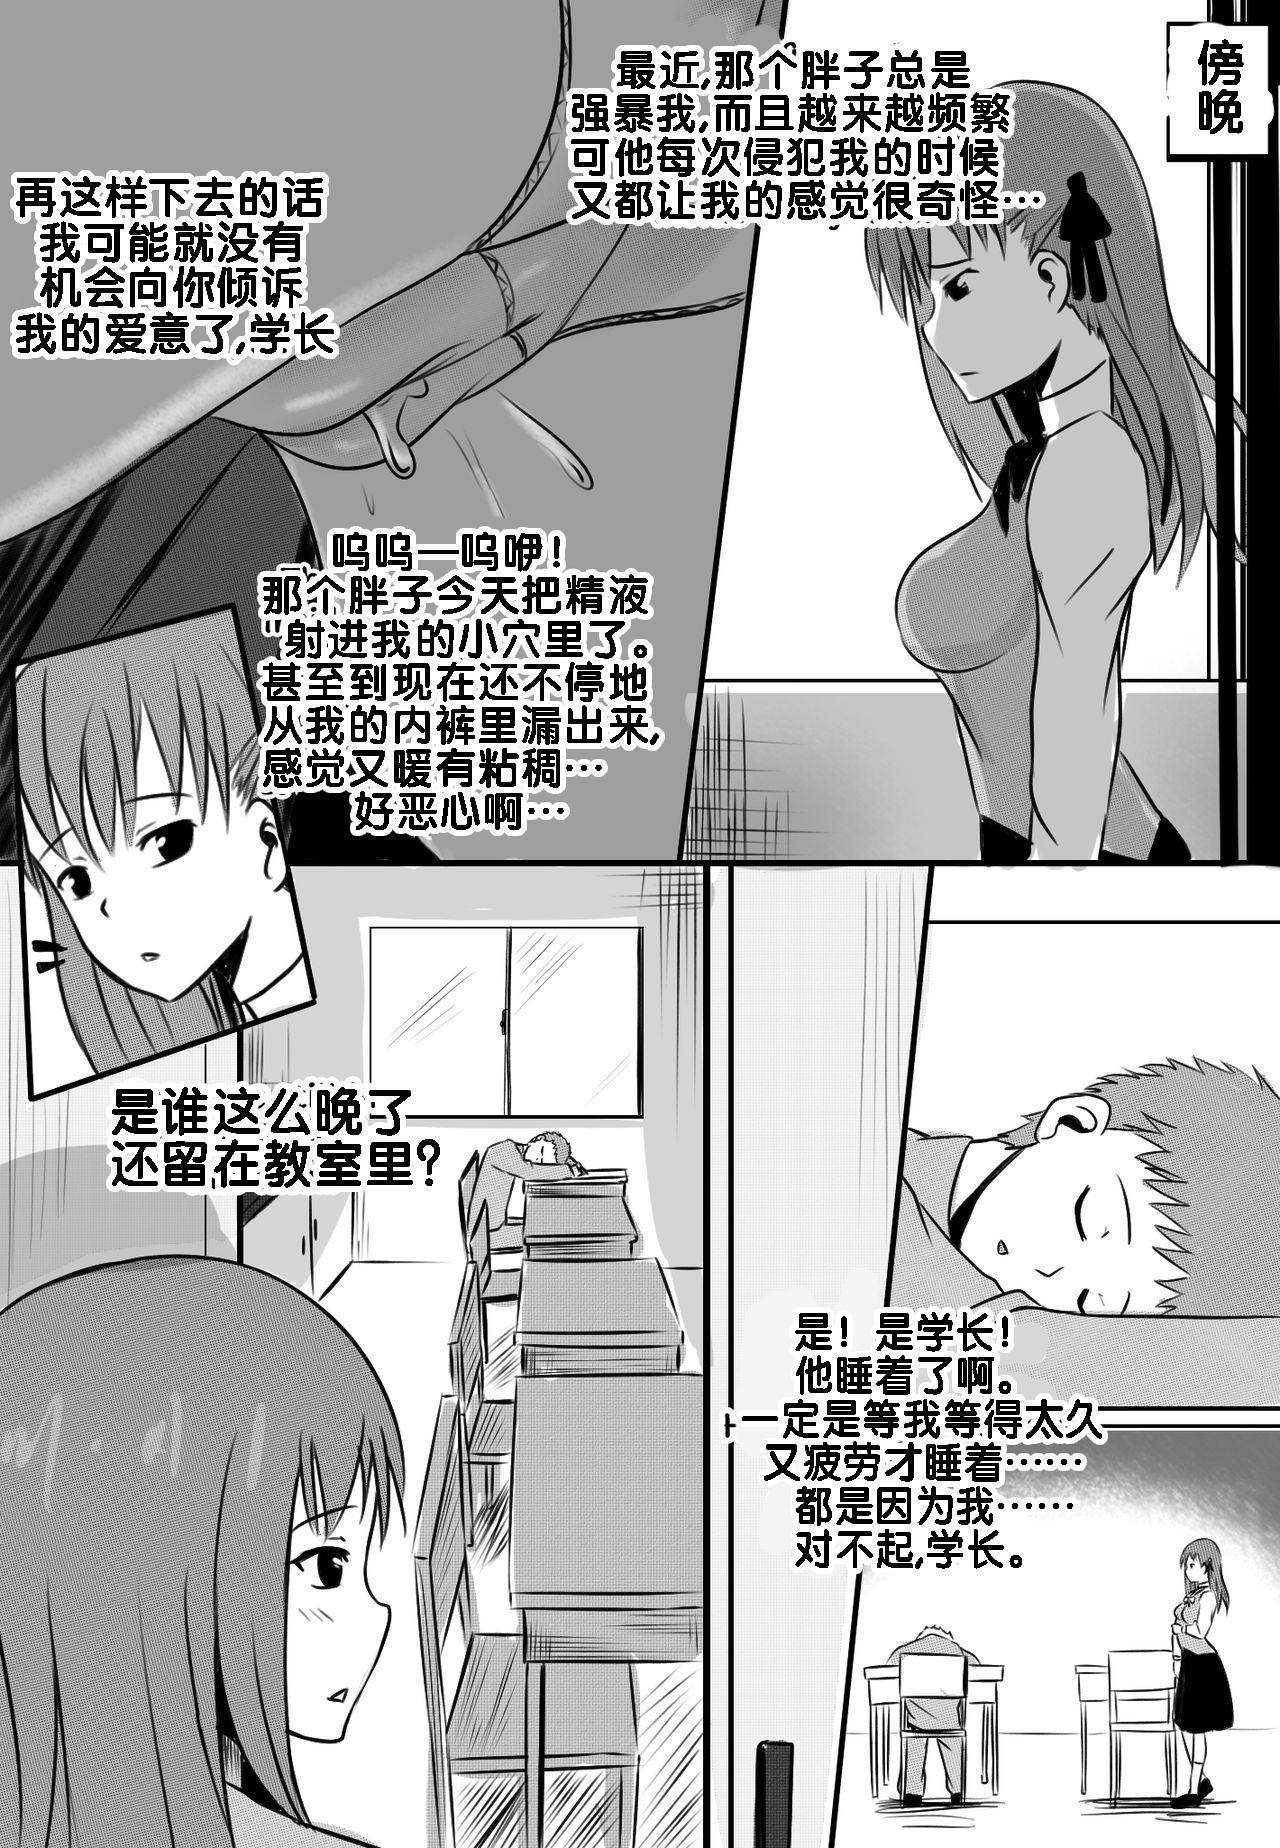 Oral Sex B-Trayal 10 - Fate stay night Small Boobs - Page 8